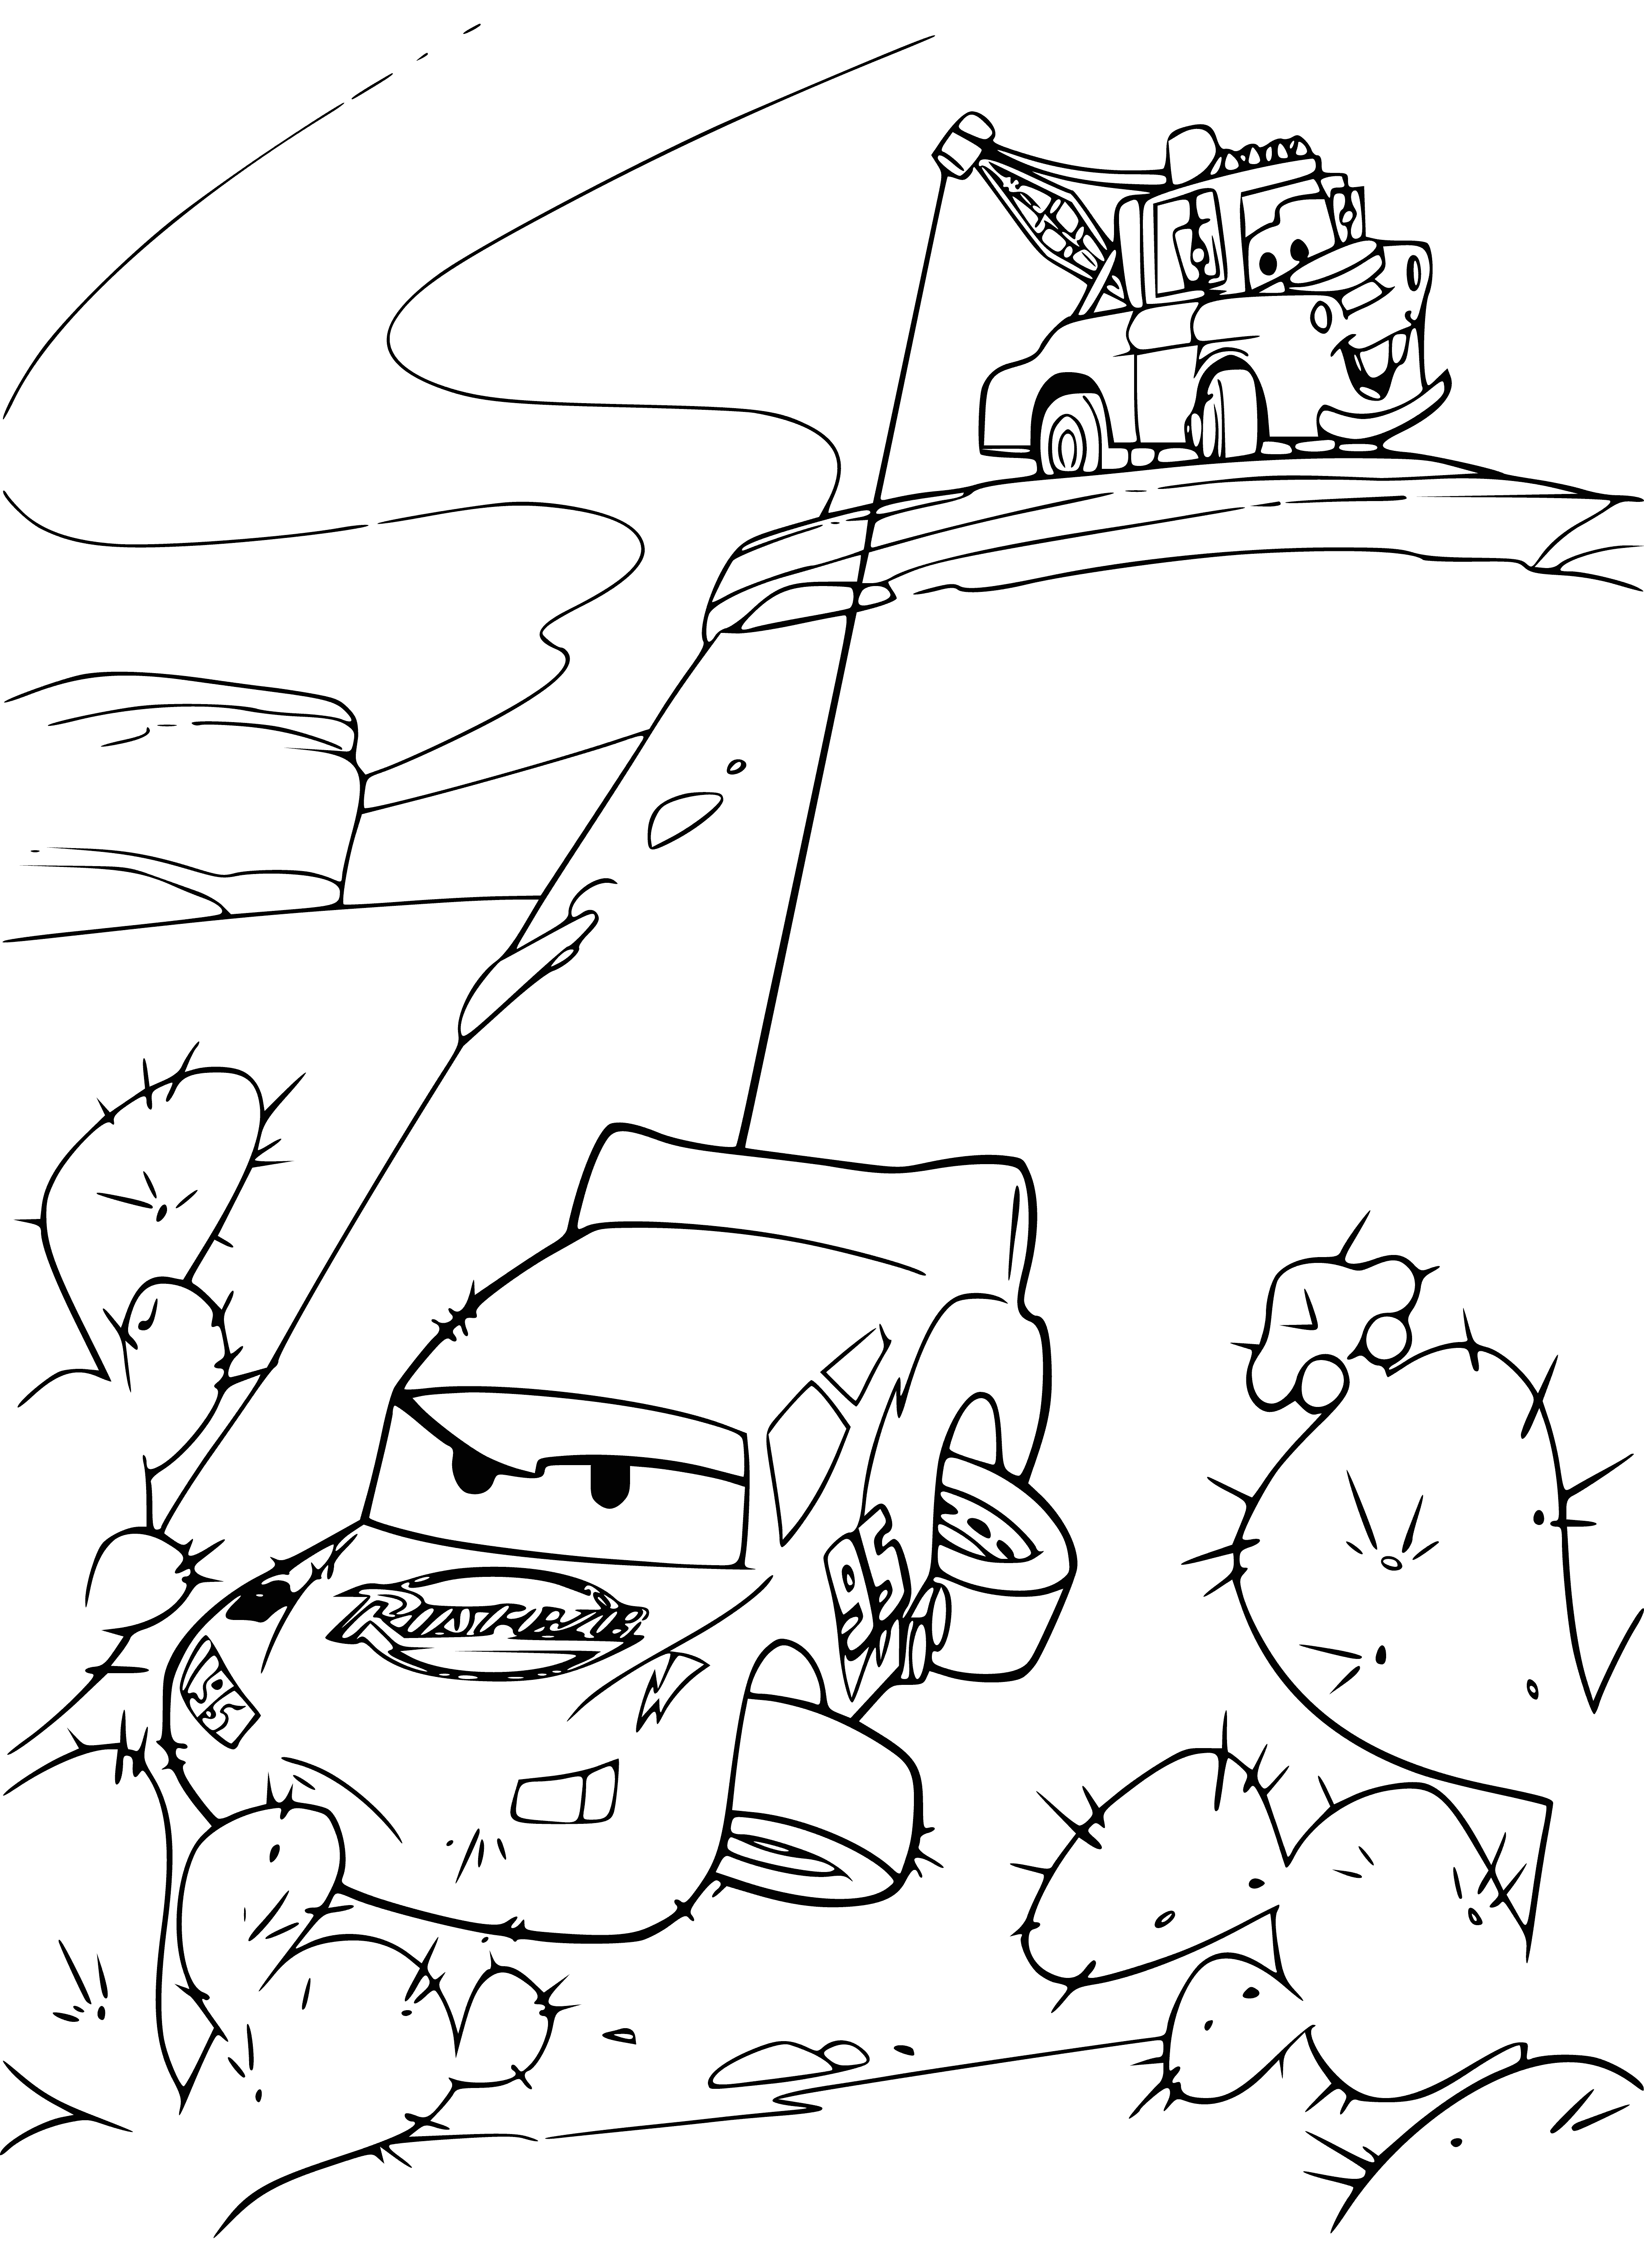 coloring page: Drivers race over, car badly damaged, driver nowhere to be seen - this car won't go anywhere soon.